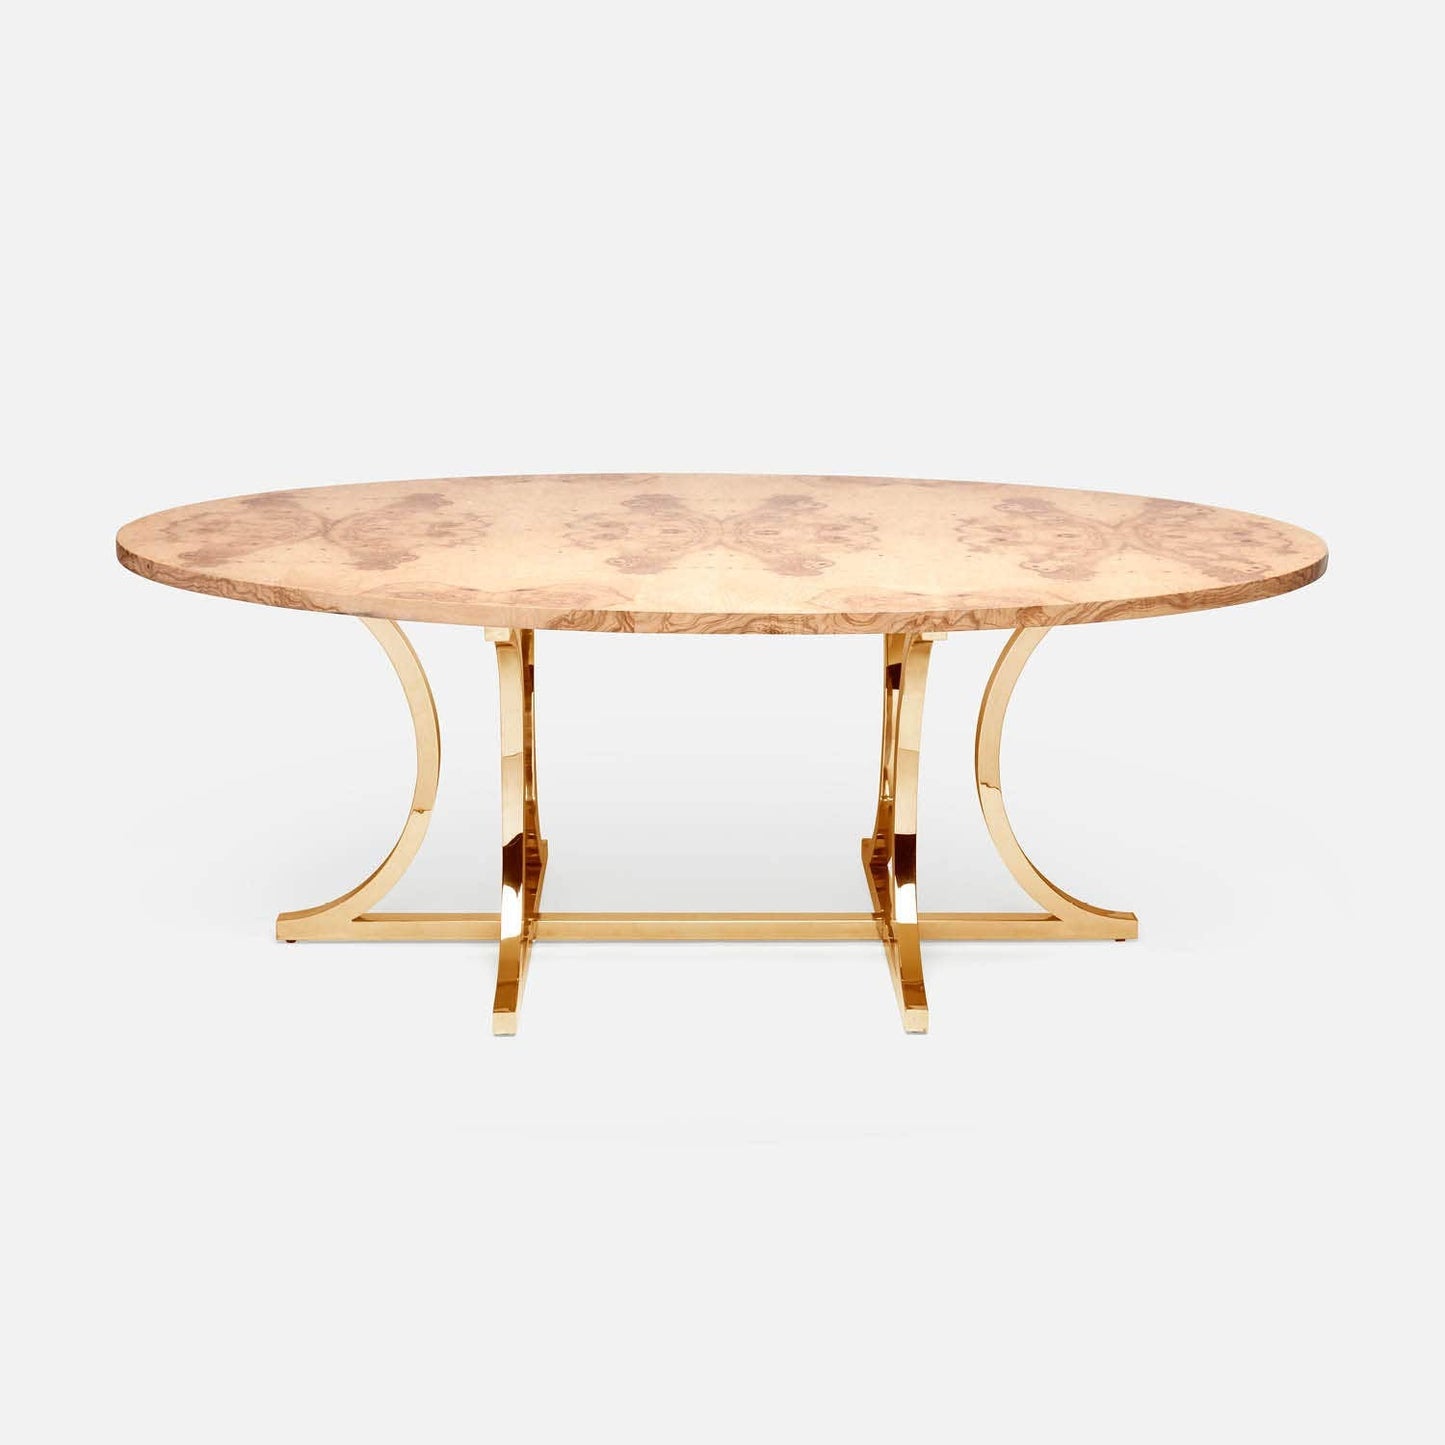 Made Goods Leighton 84" x 42" x 30" Polished Gold Steel Dinning Table With Oval Olive Ash Veneer Table Top